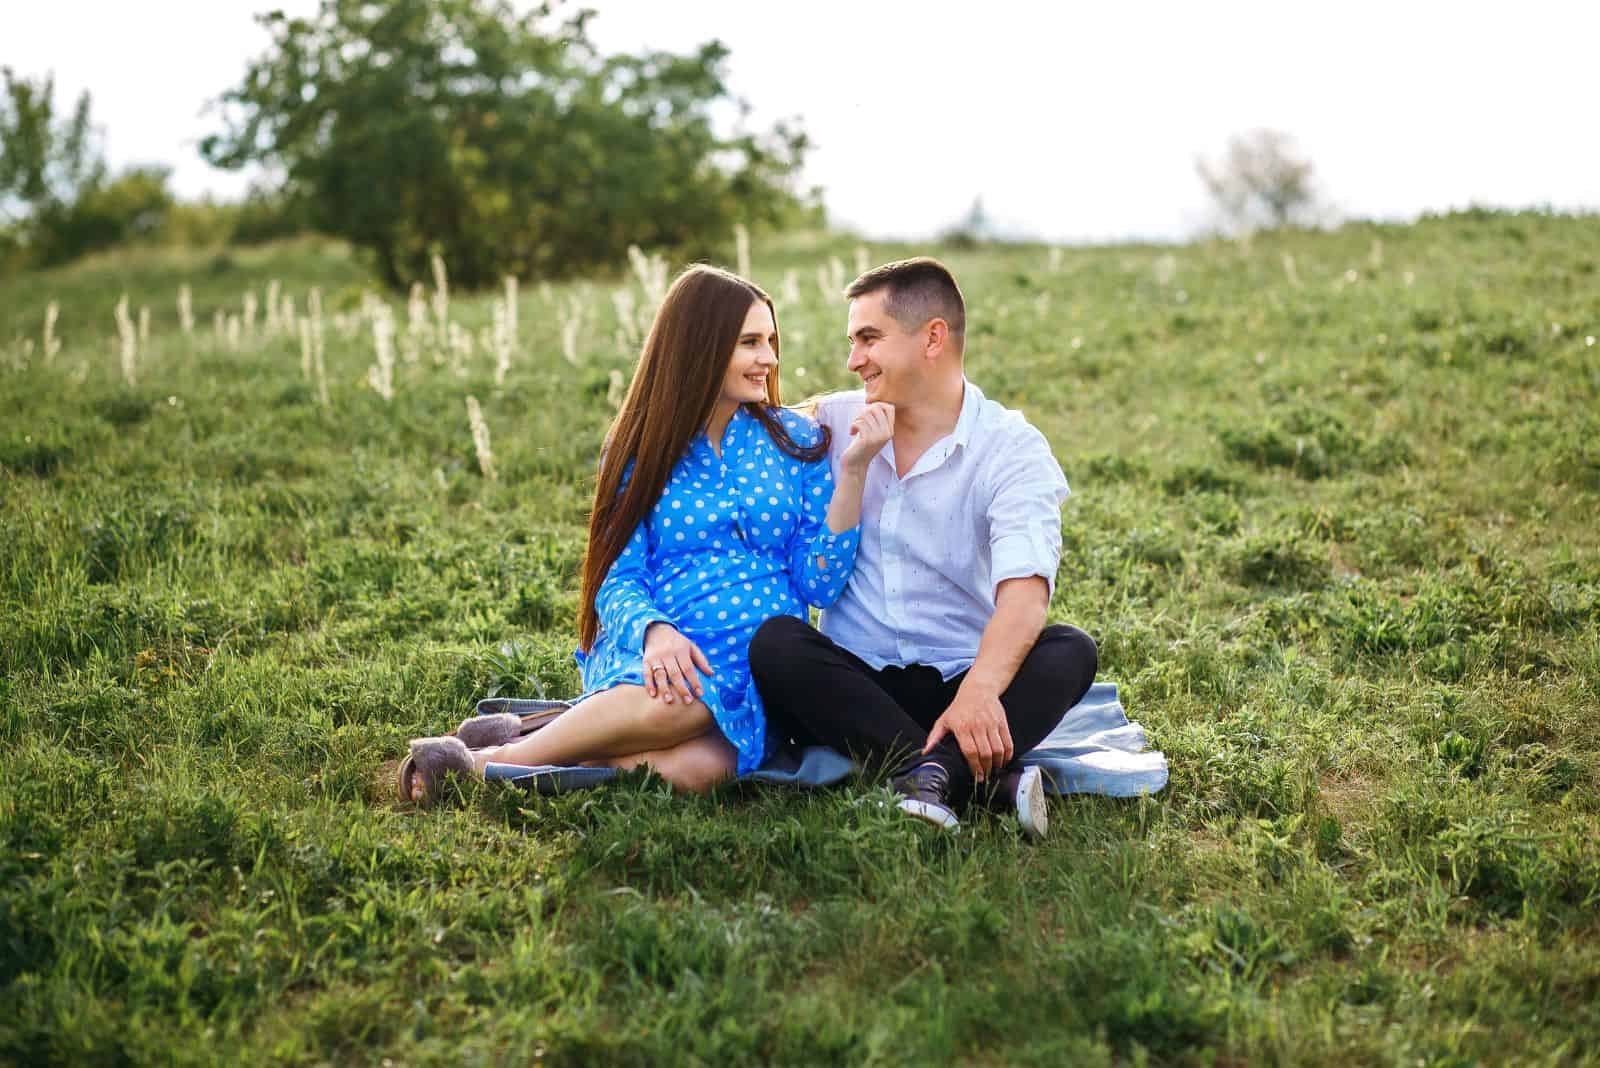 a smiling pregnant woman sits on the grass with a man